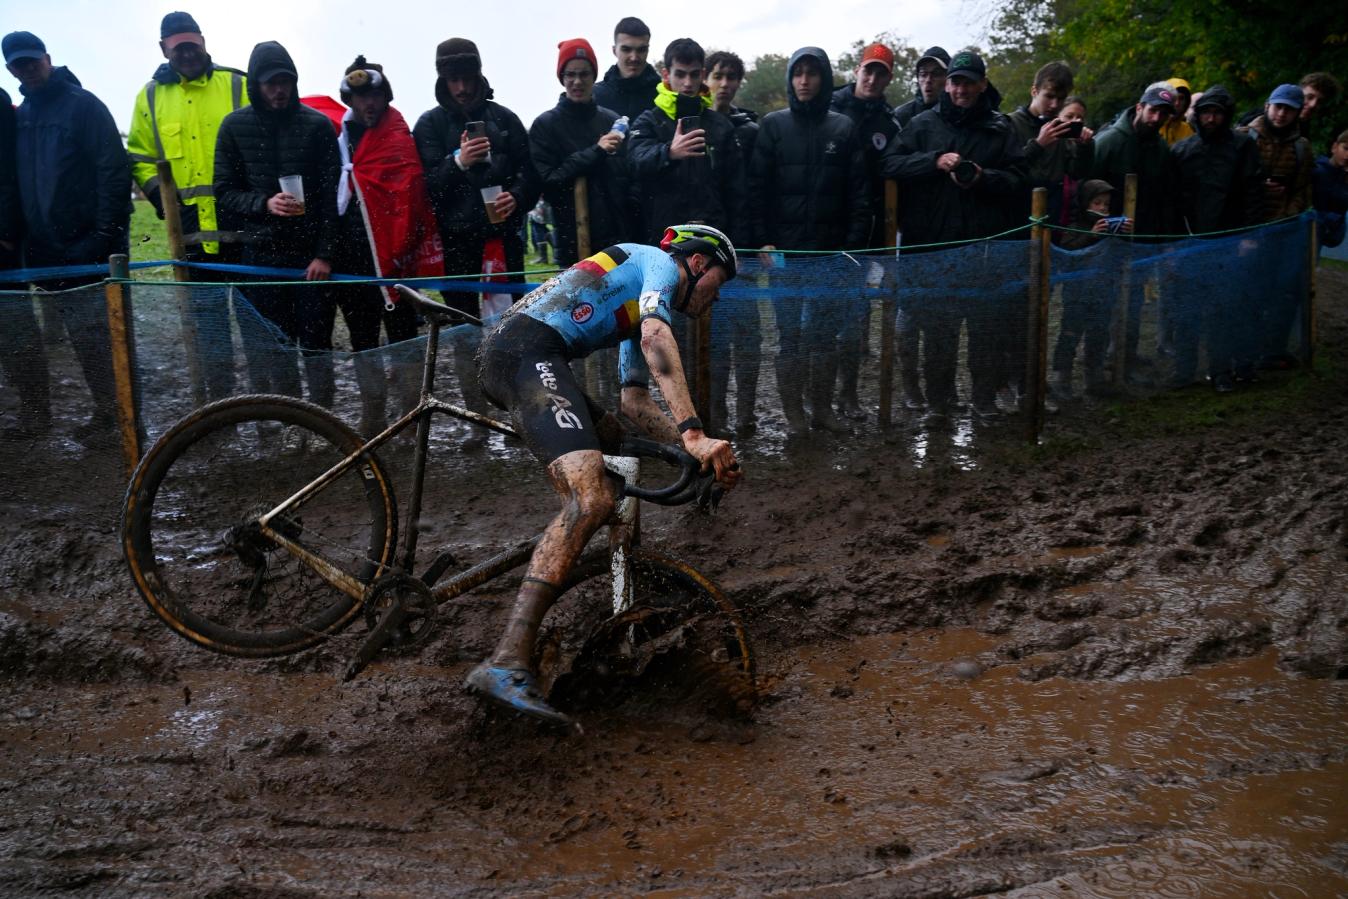 Despite beginning the race in sunshine, the weather soon took a turn for the worse in France